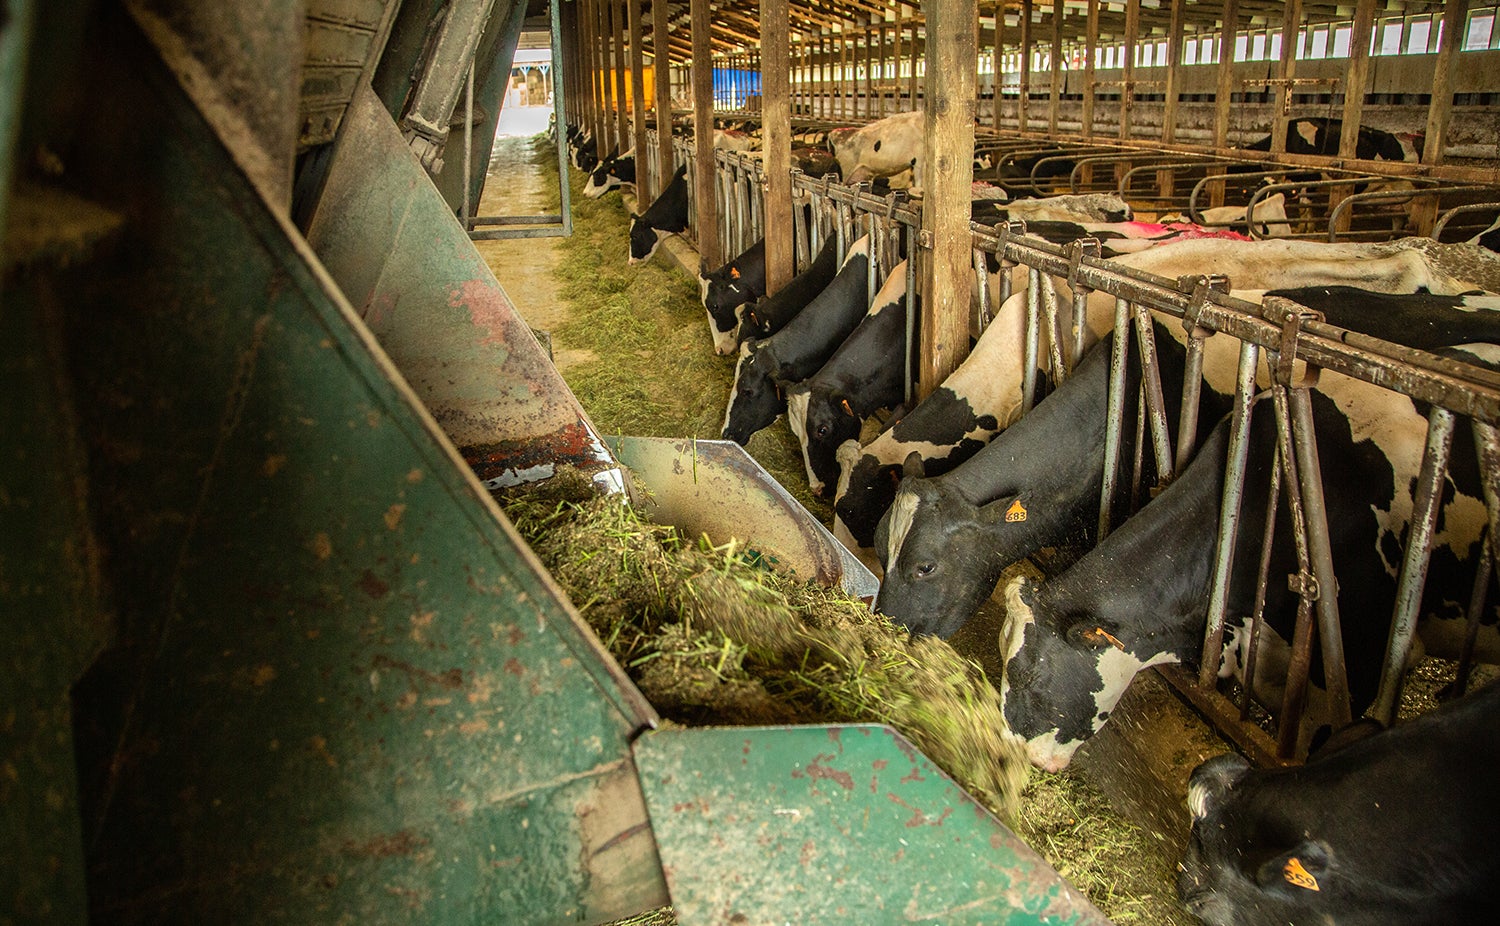 Cows eating feed in a barn